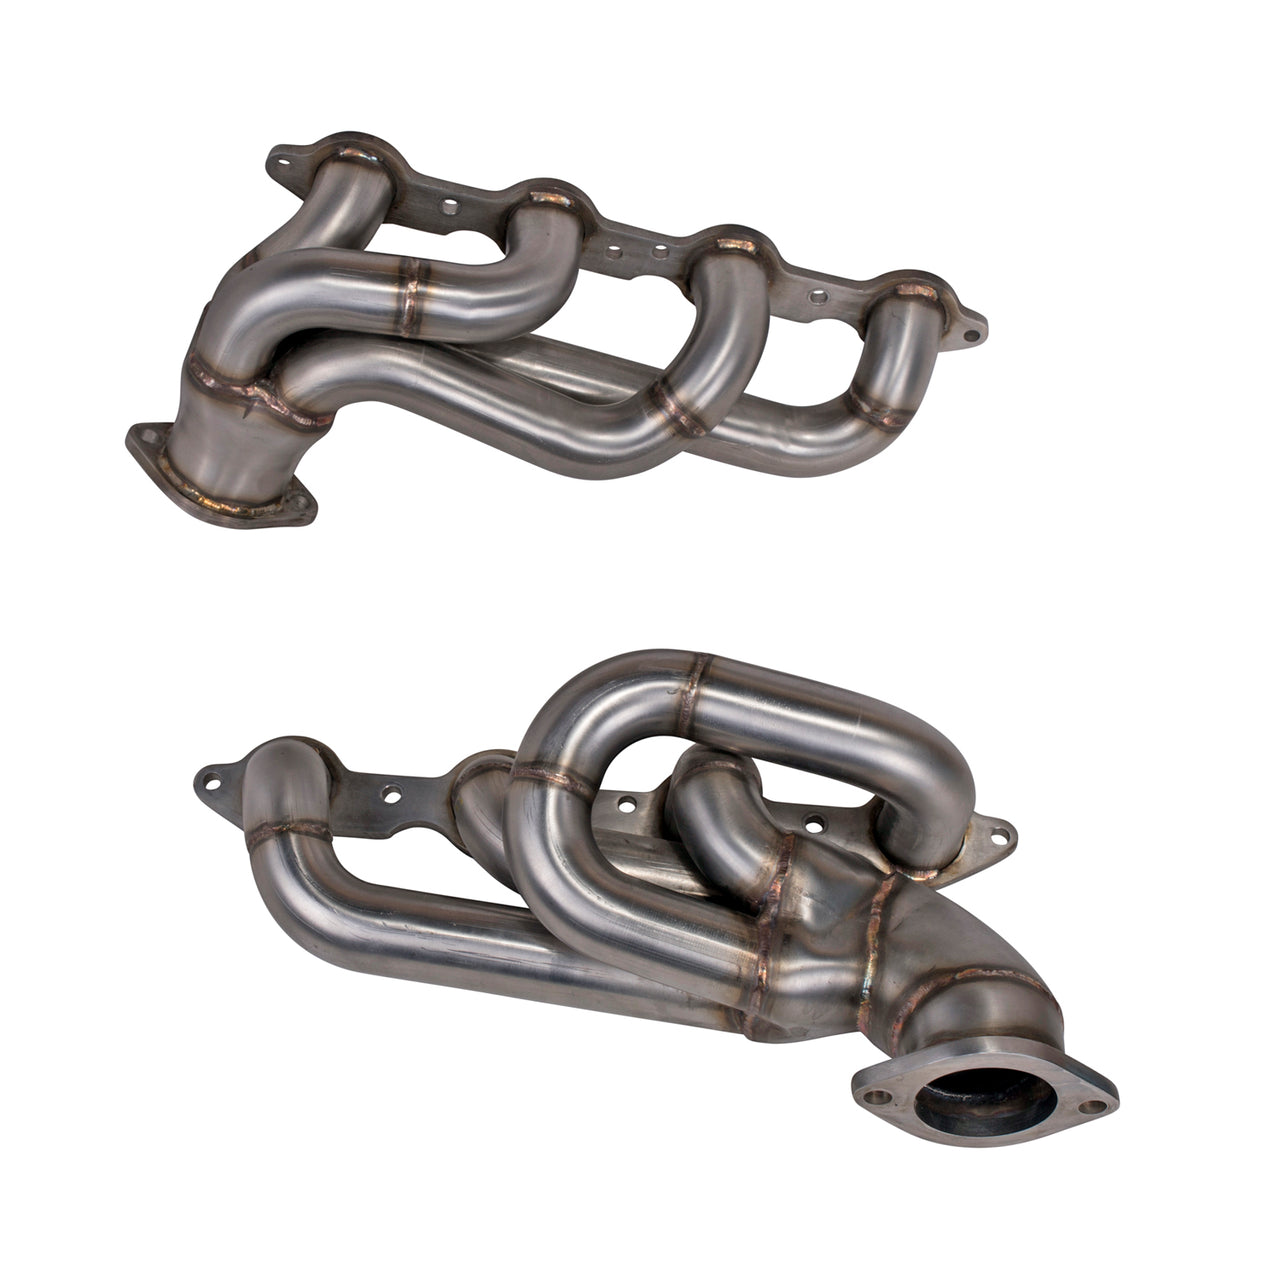 2010-2015 CAMARO LS3/L99 1-3/4 SHORTY HEADERS (304 STAINLESS)